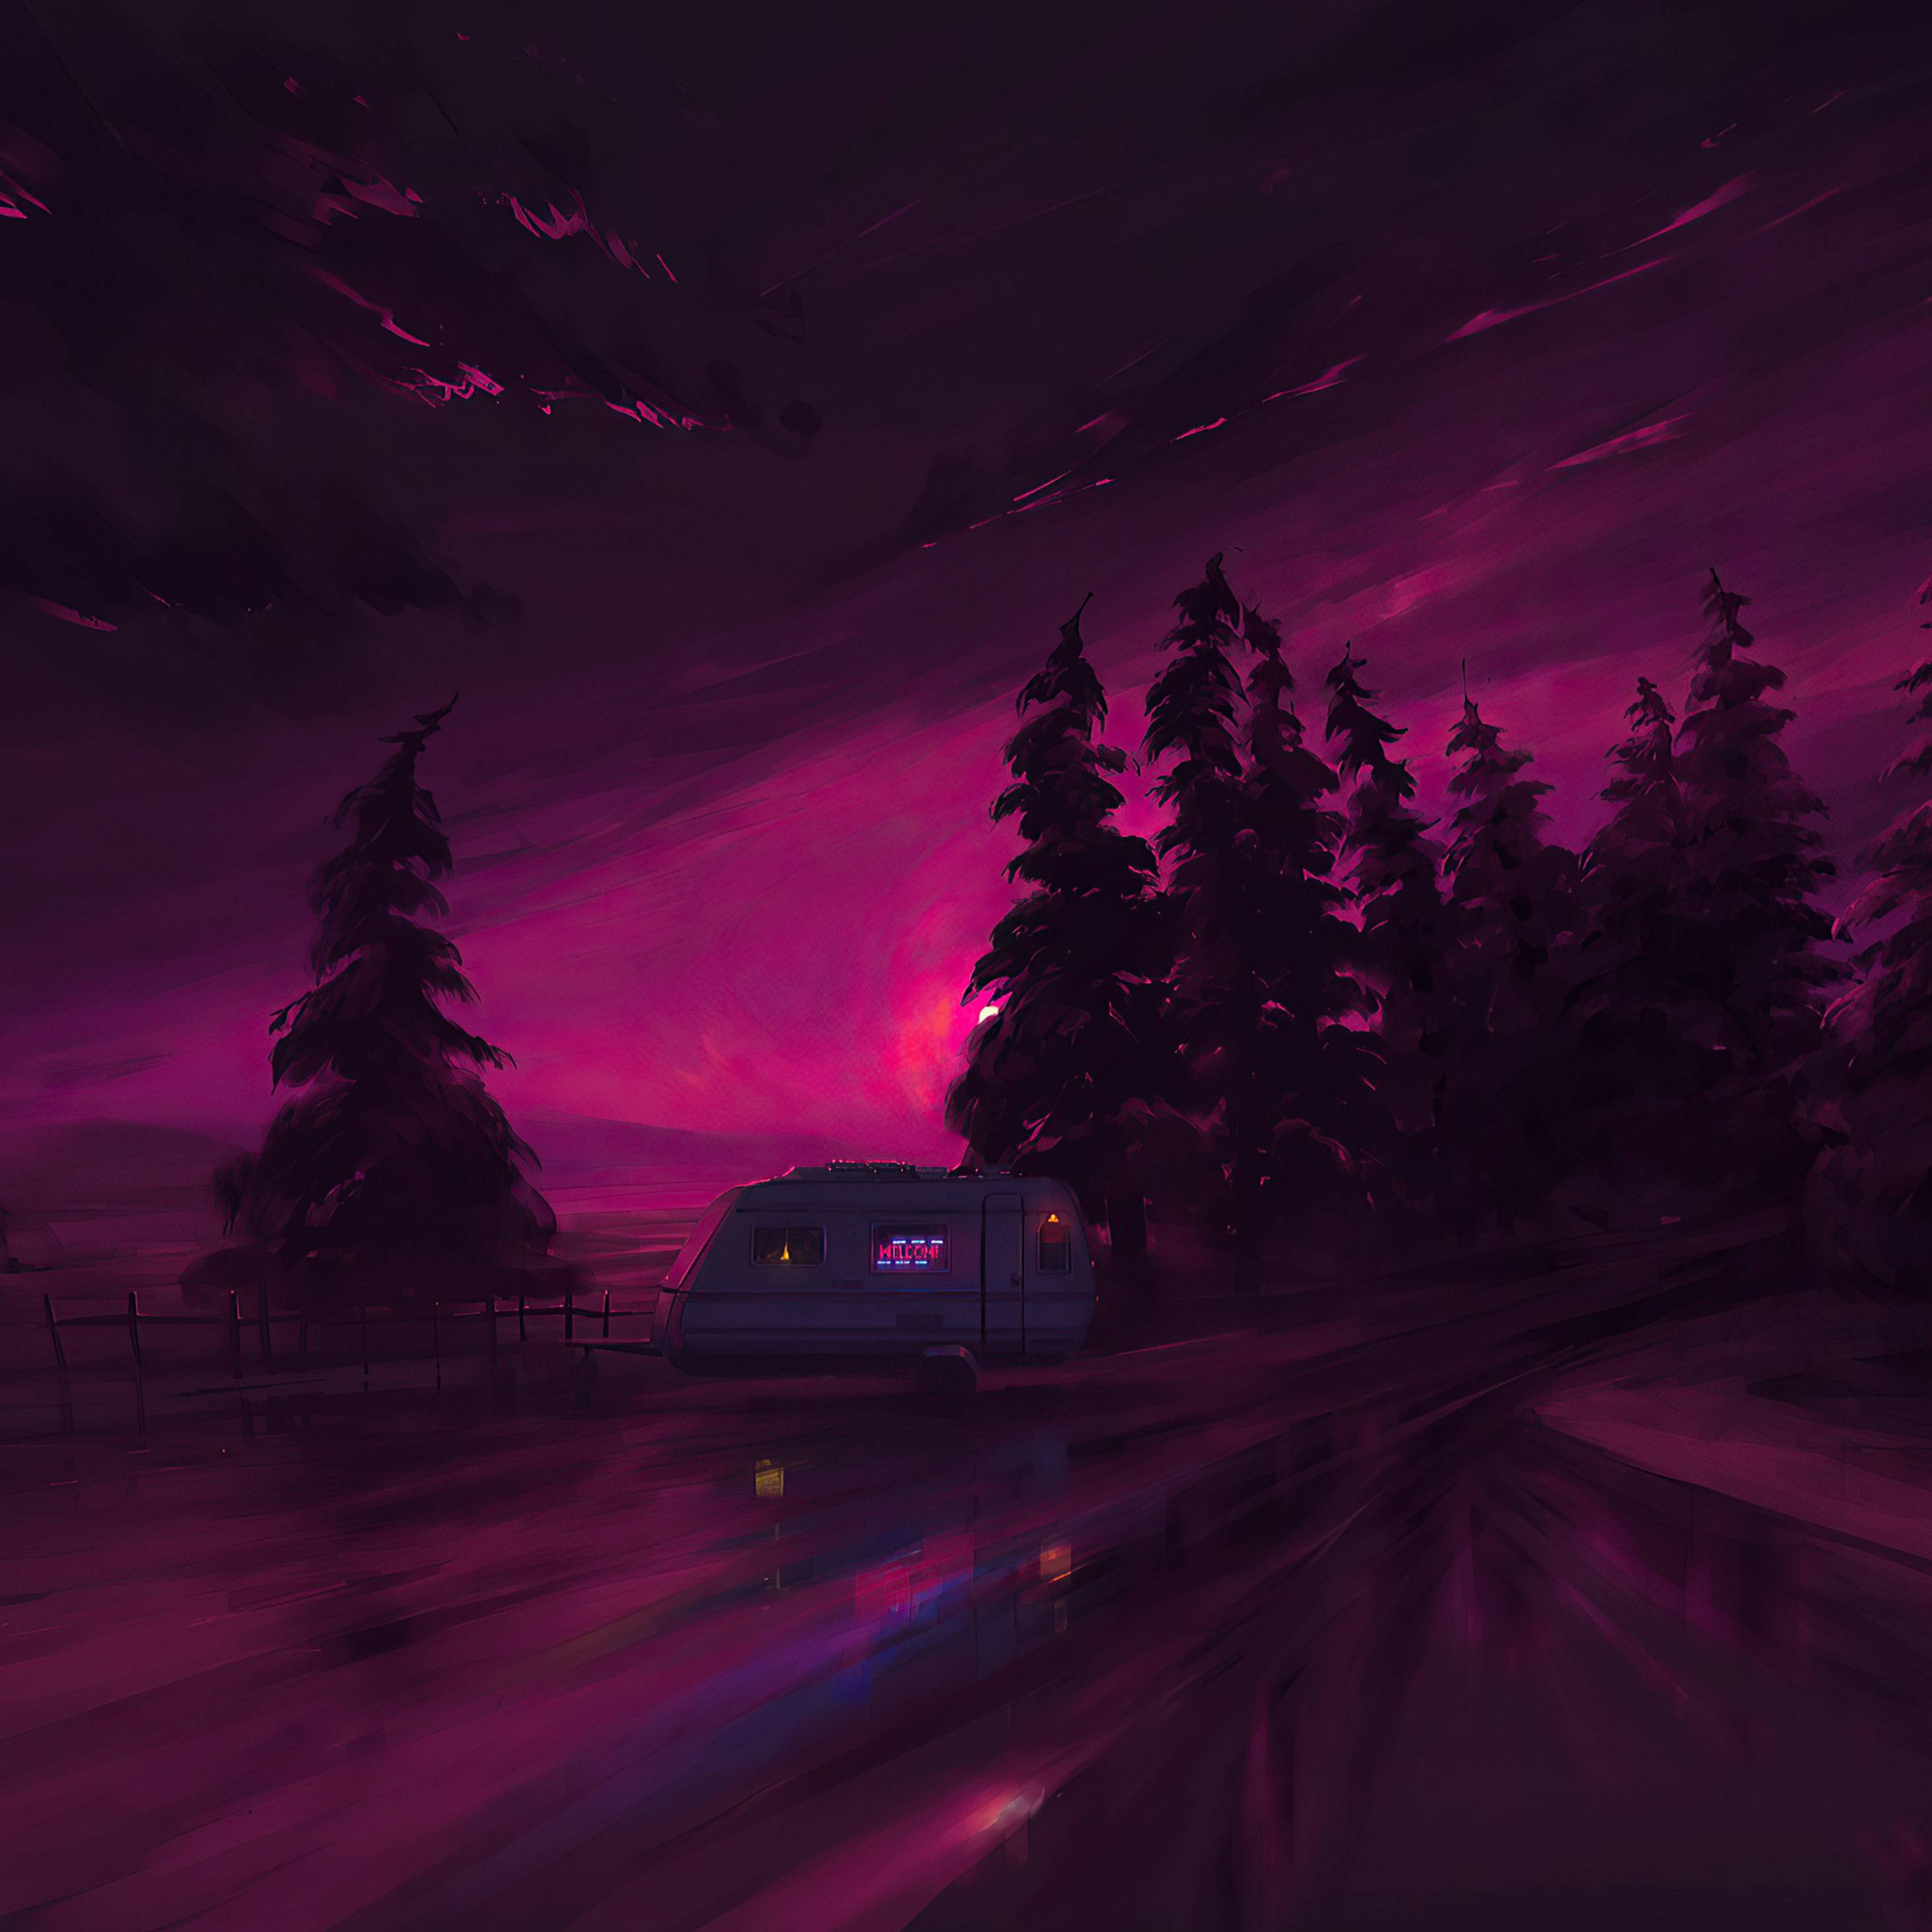 A digital painting of a camper van in a forest with a pink and purple sunset - Neon pink